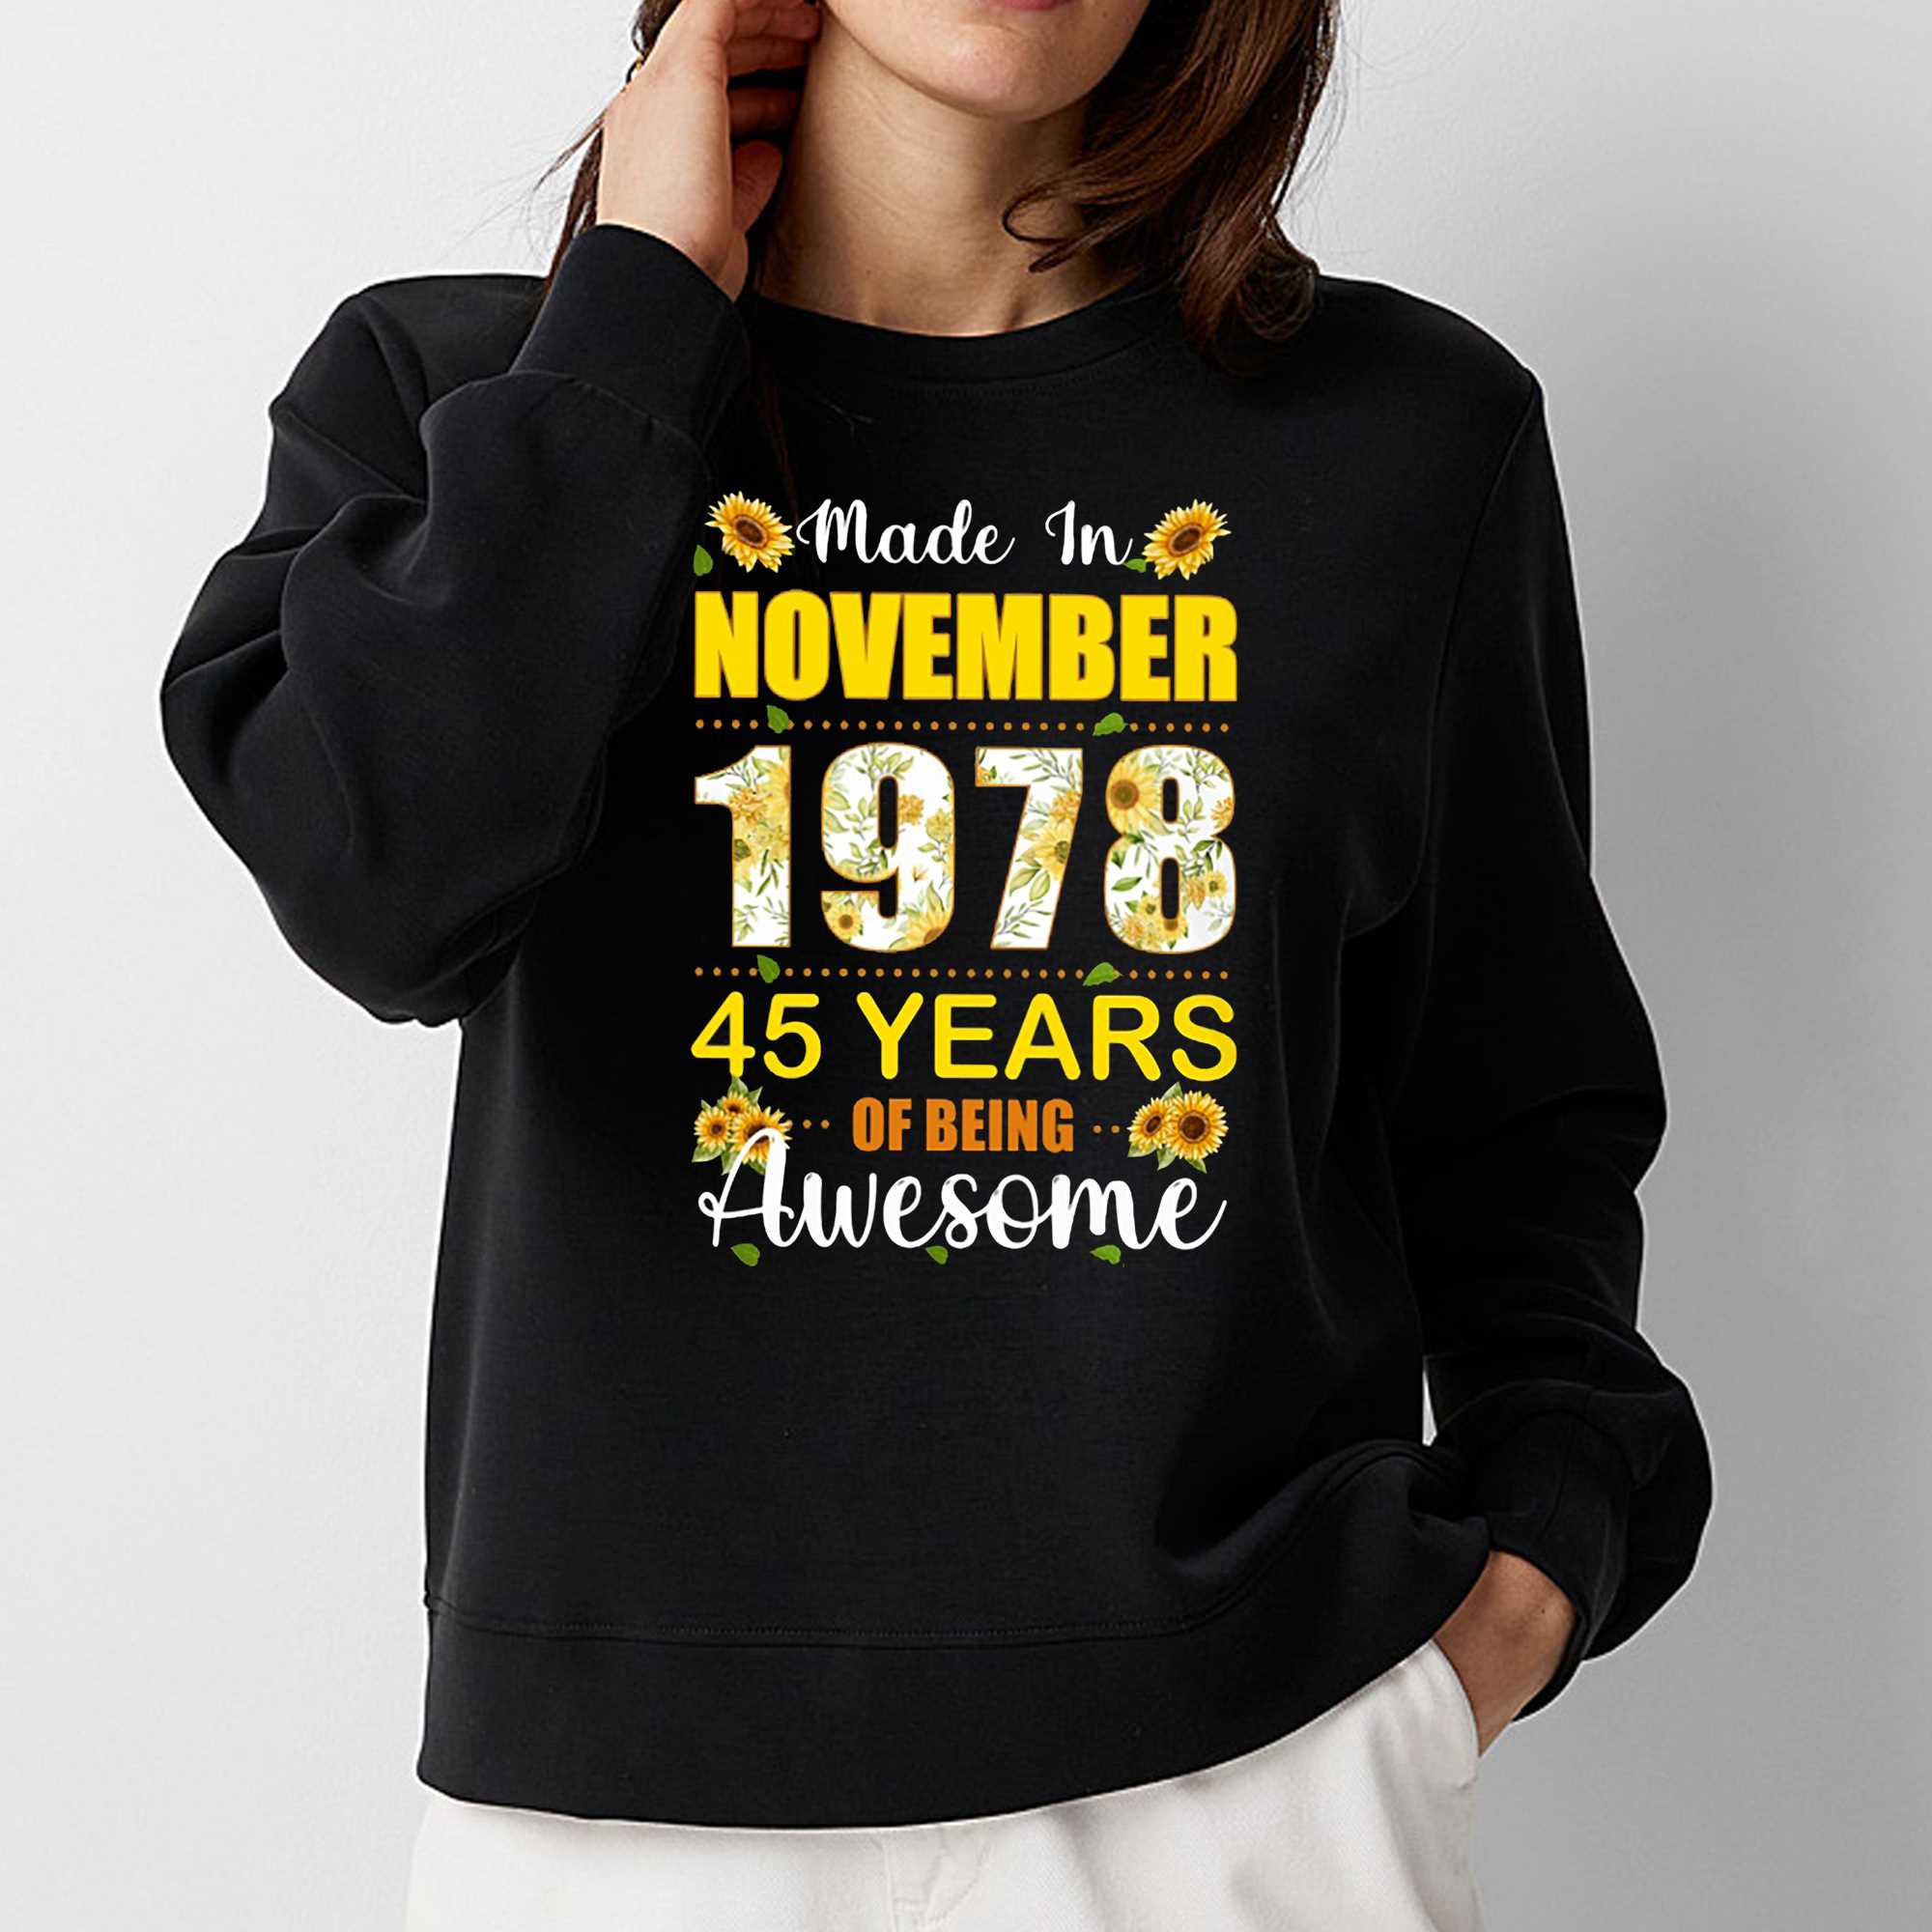 Made In November 1978 45 Years Of Being Awesome Shirt 